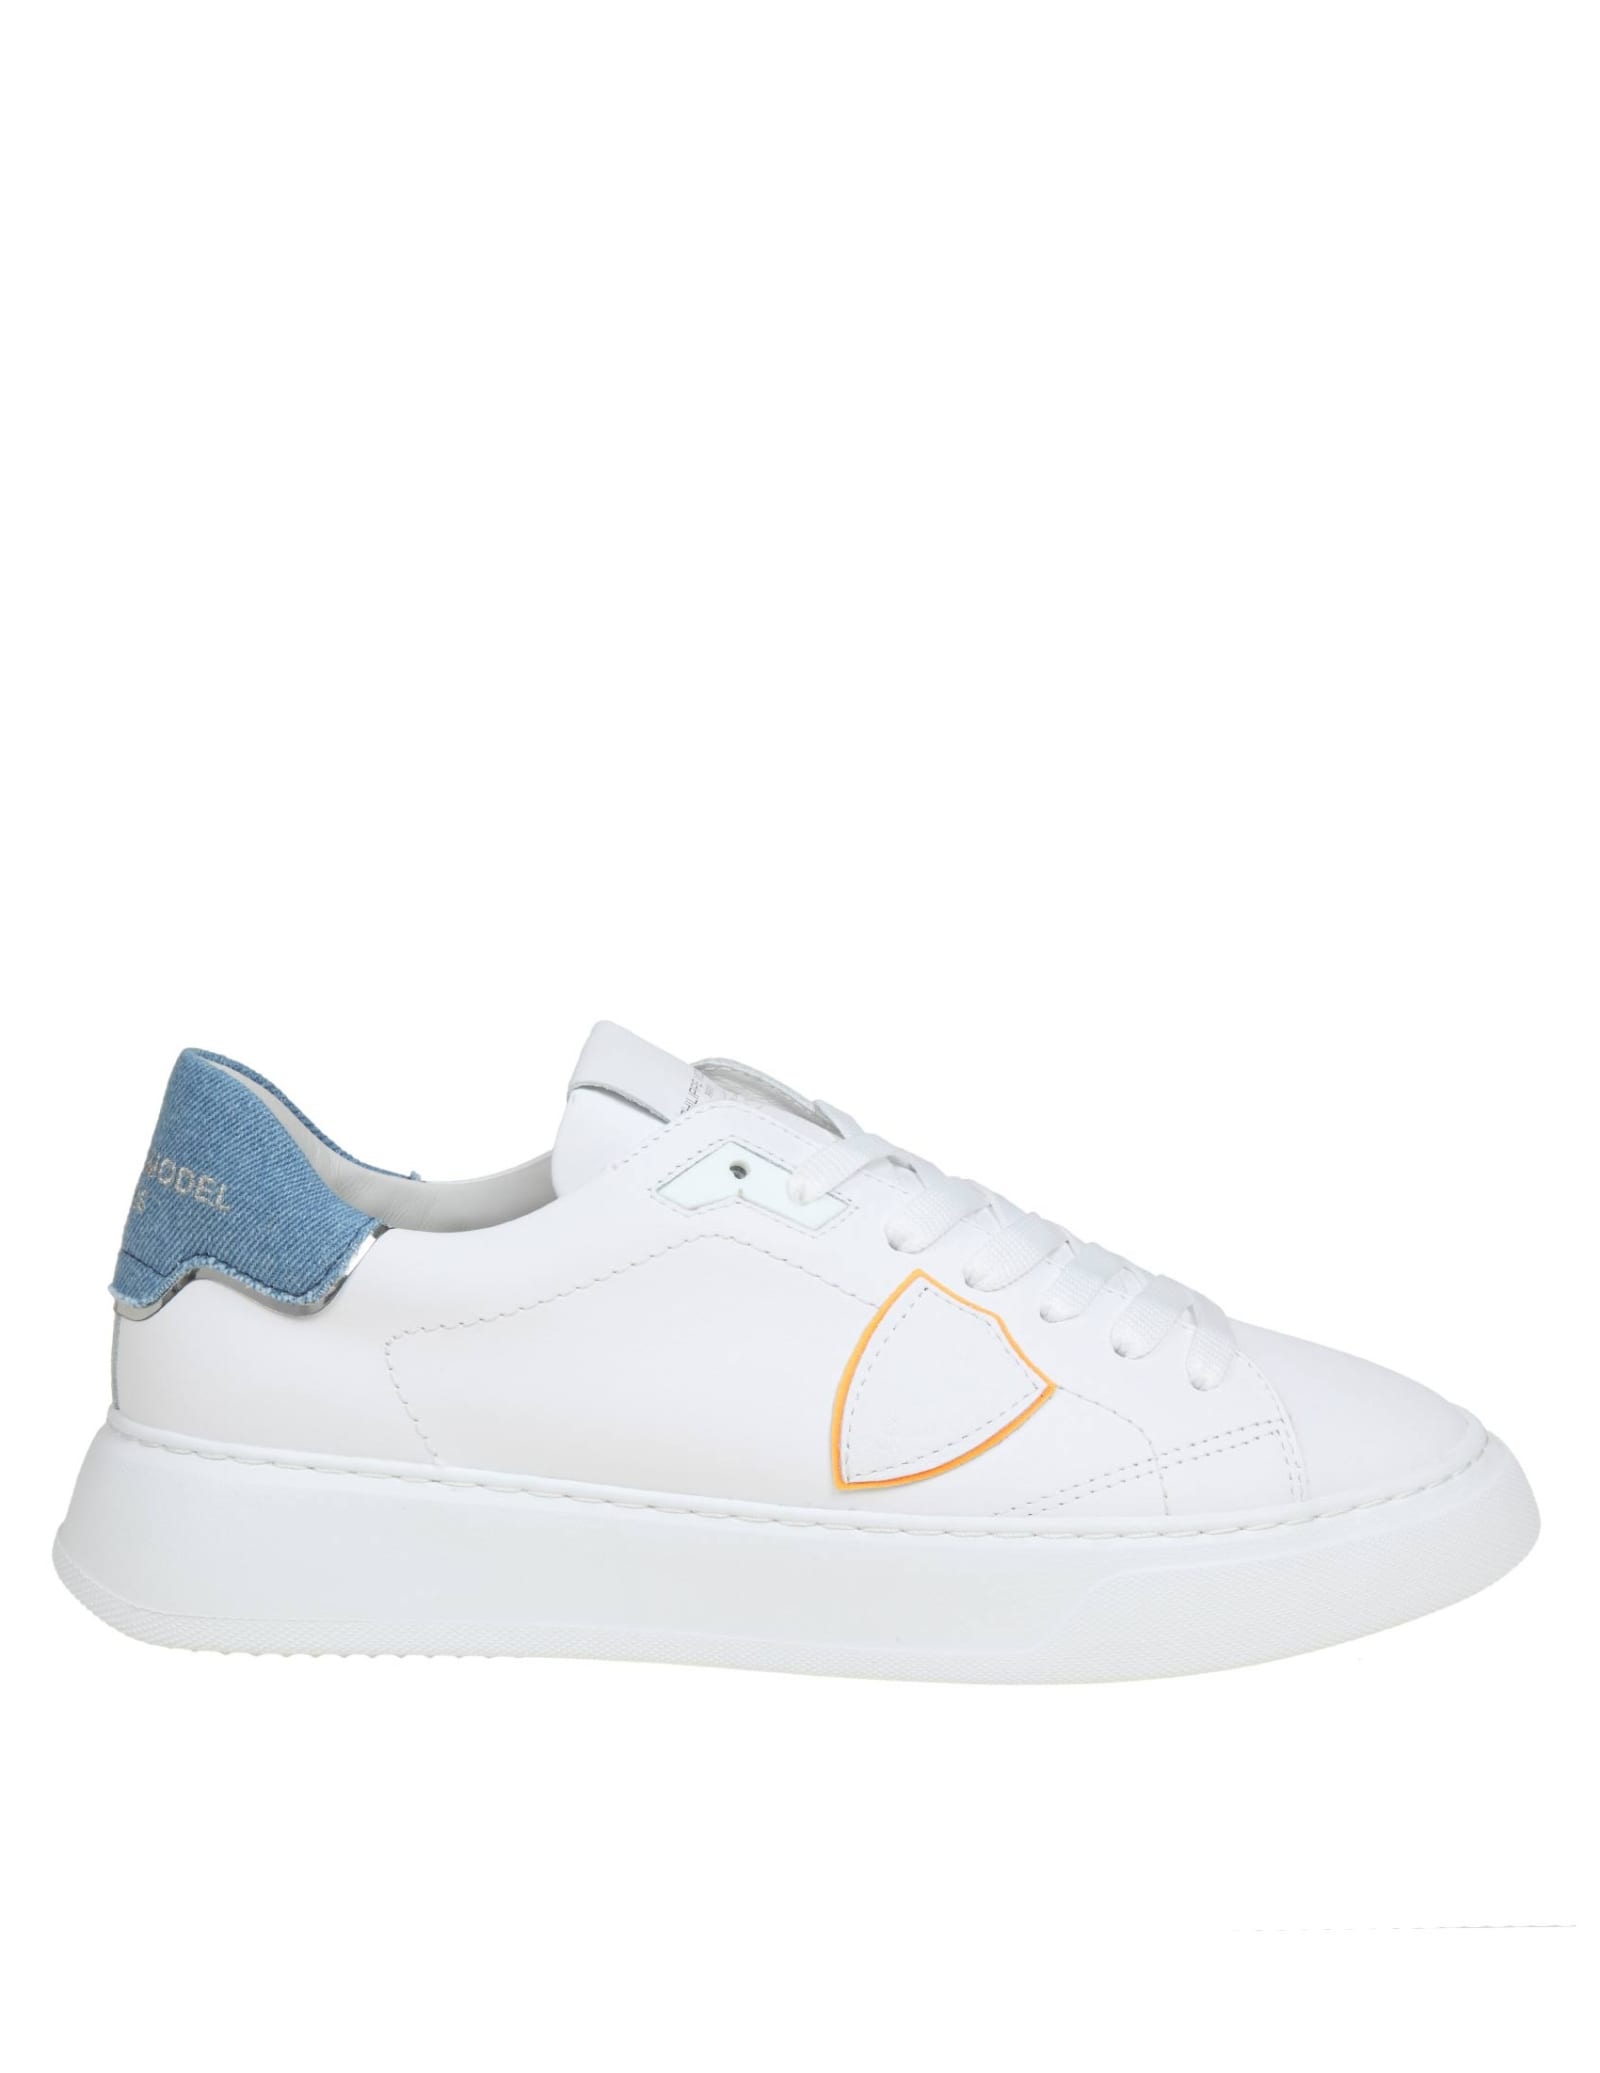 Temple Sneakers In White/blue Leather